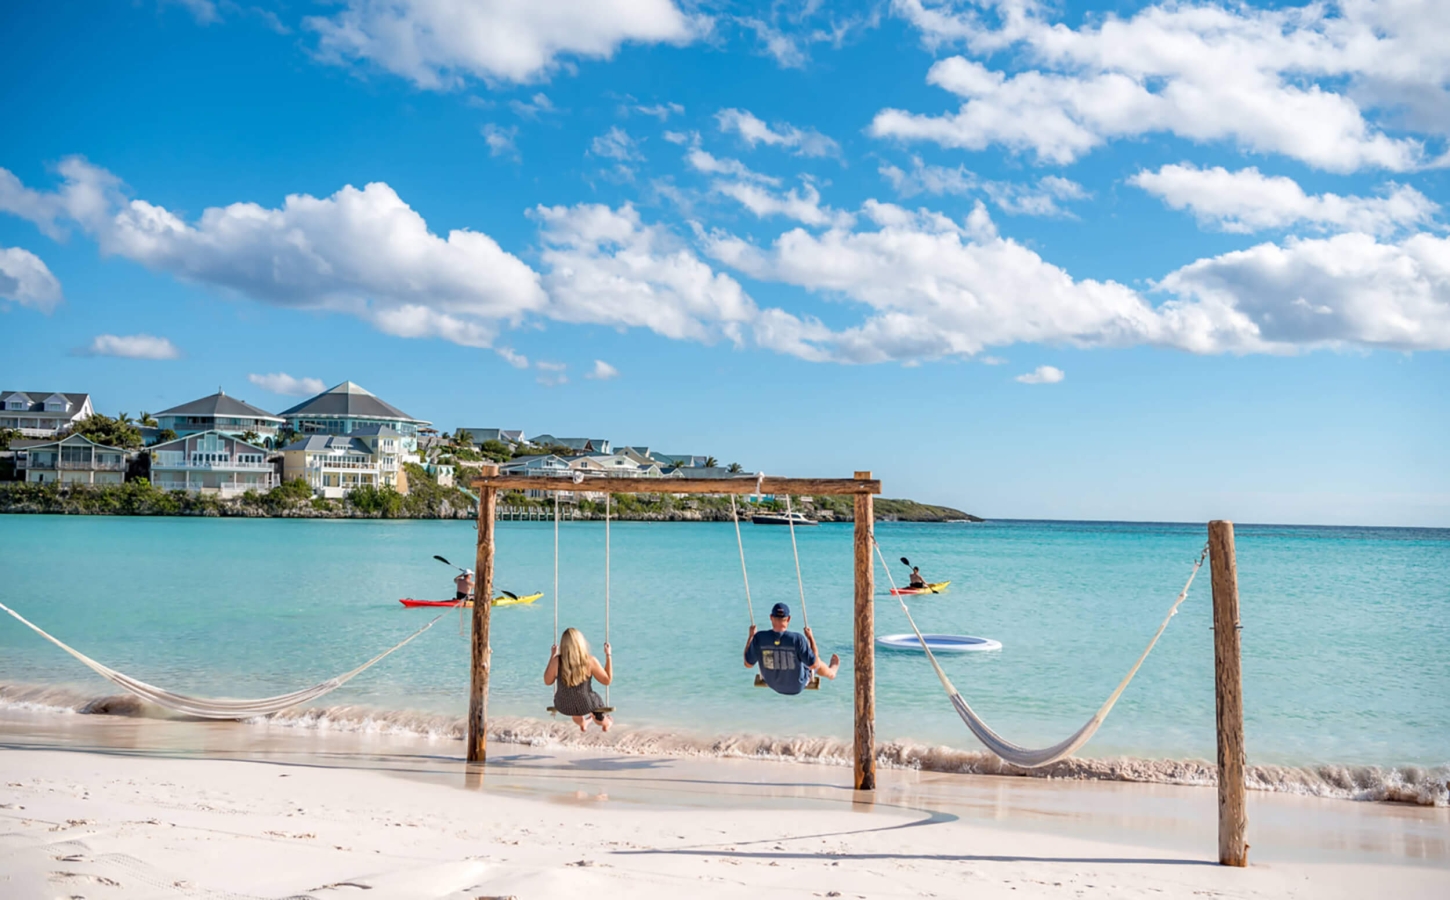 Two people on wooden swings at The Abaco Club offering a leisurely club lifestyle amidst the stunning coastal landscape of the Bahamas.